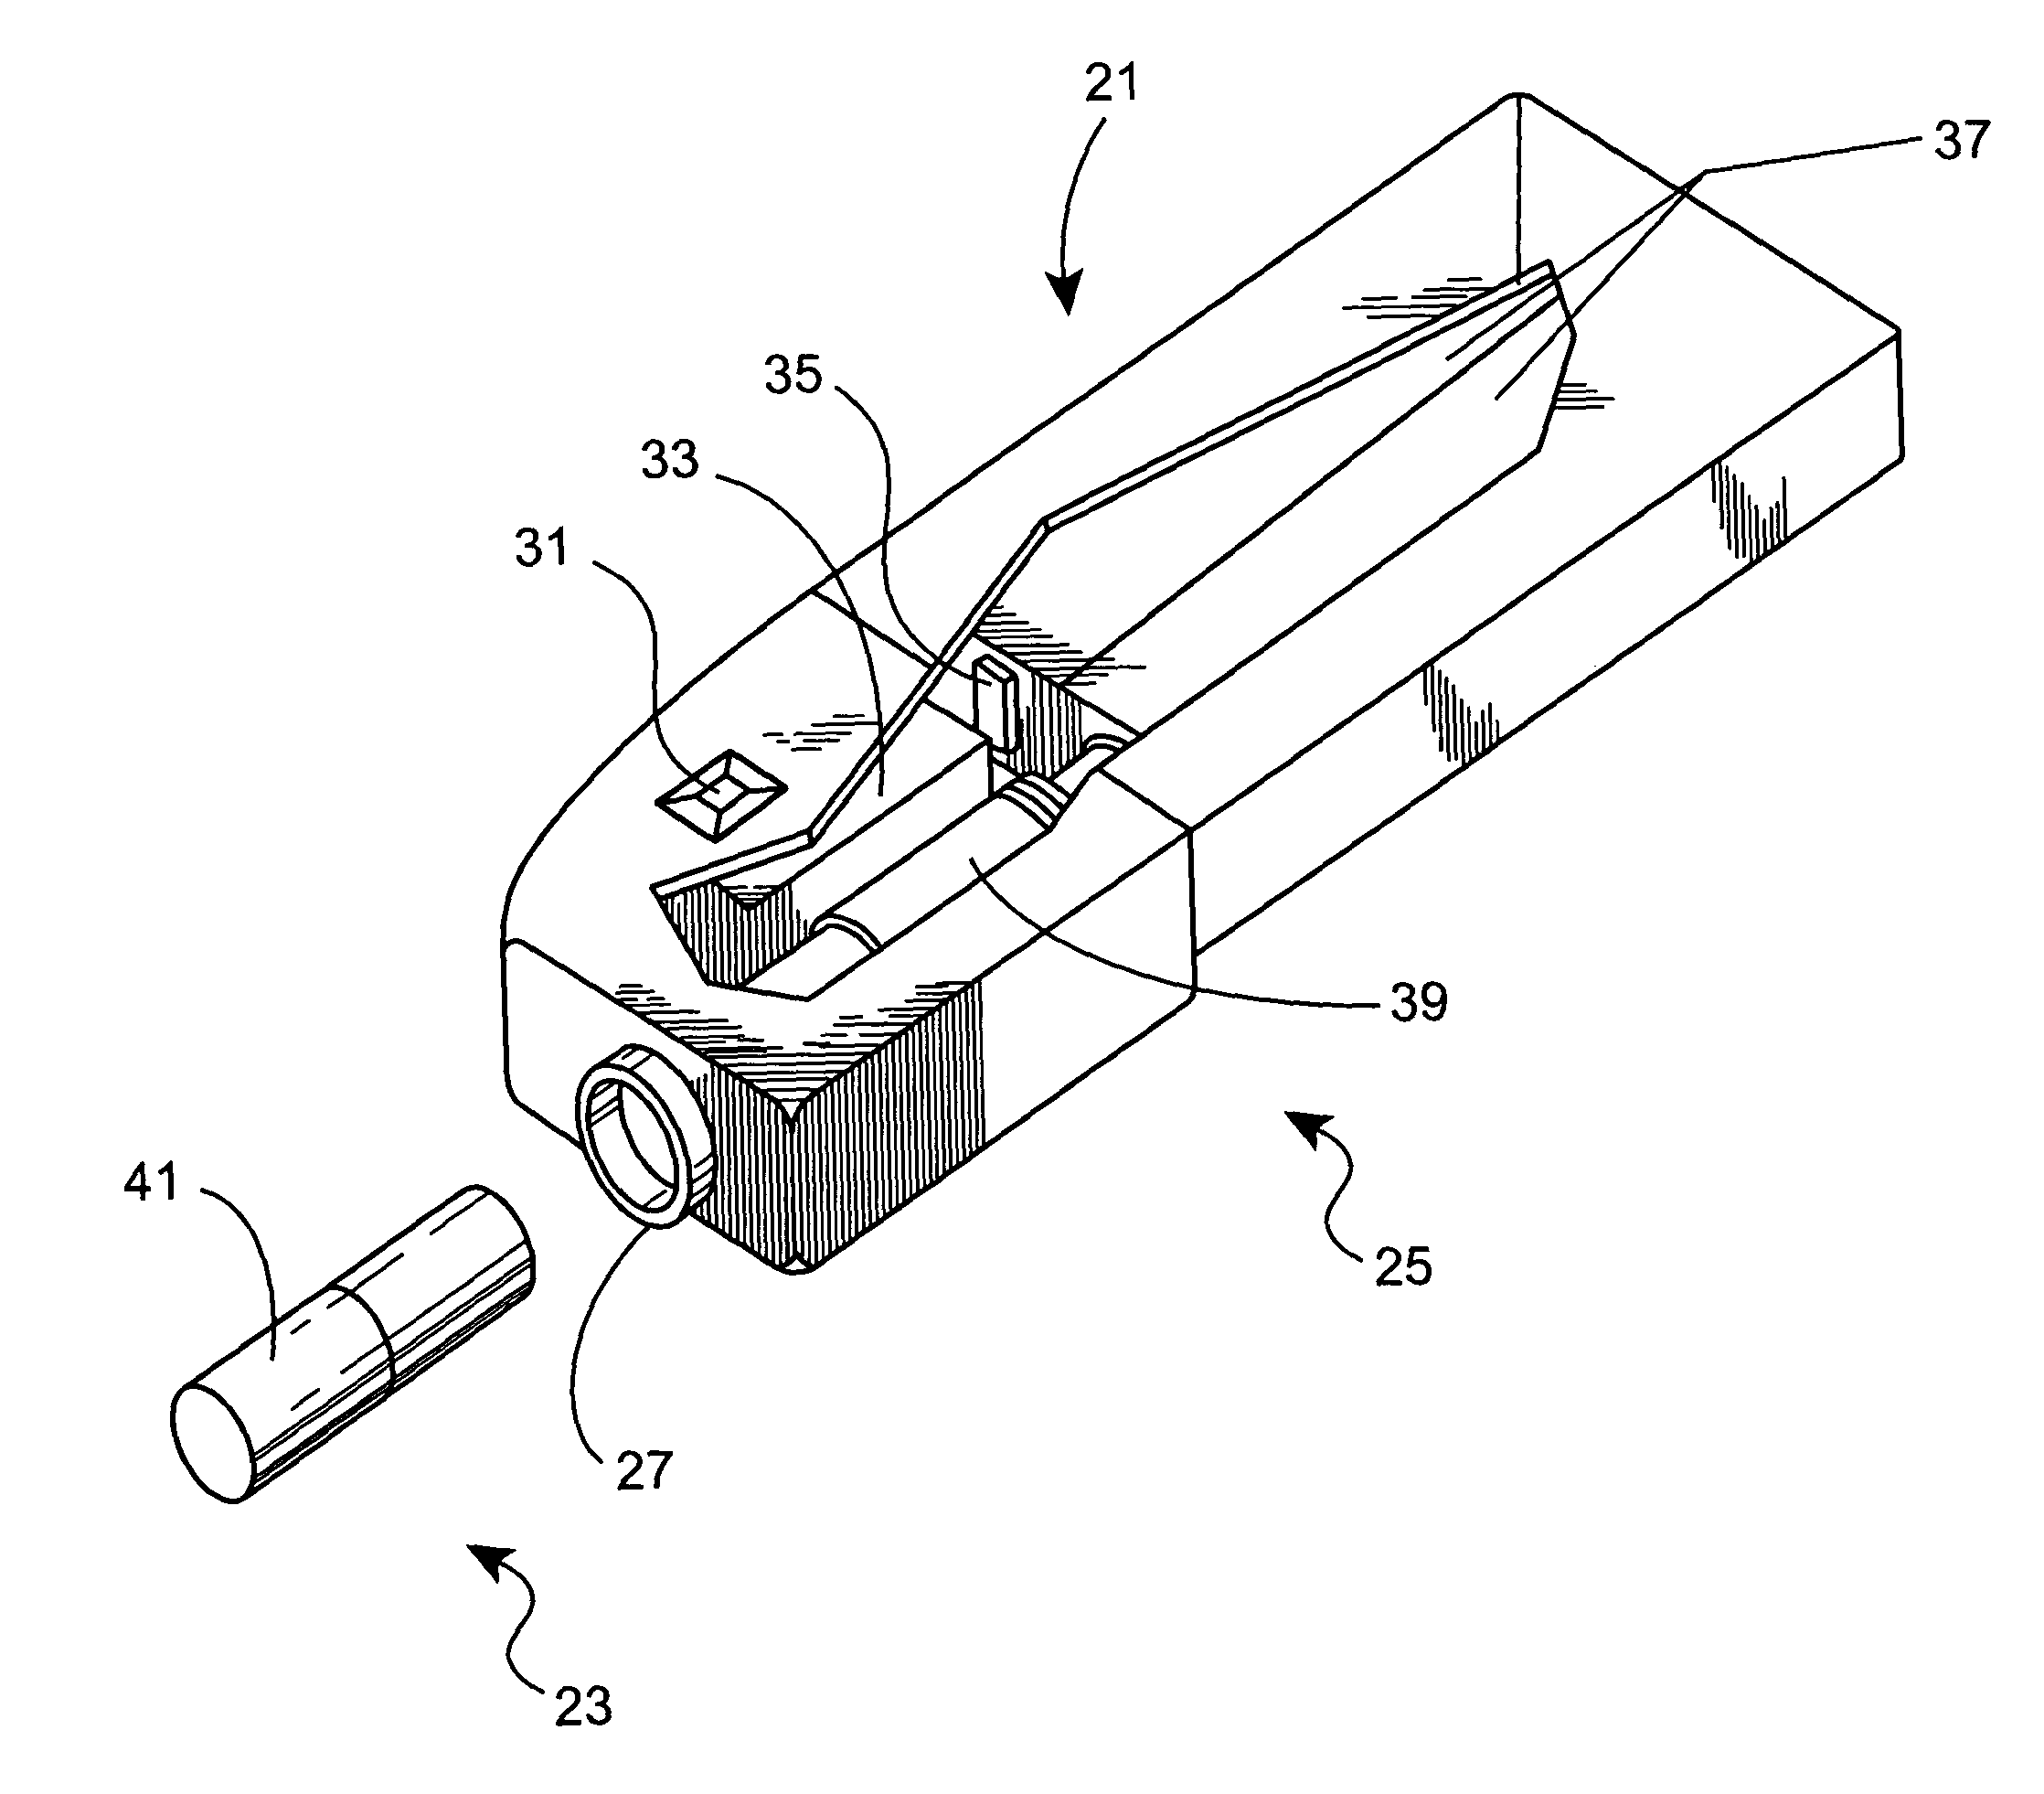 Inductive heating magnetic structure for removing condensates from electrical smoking device